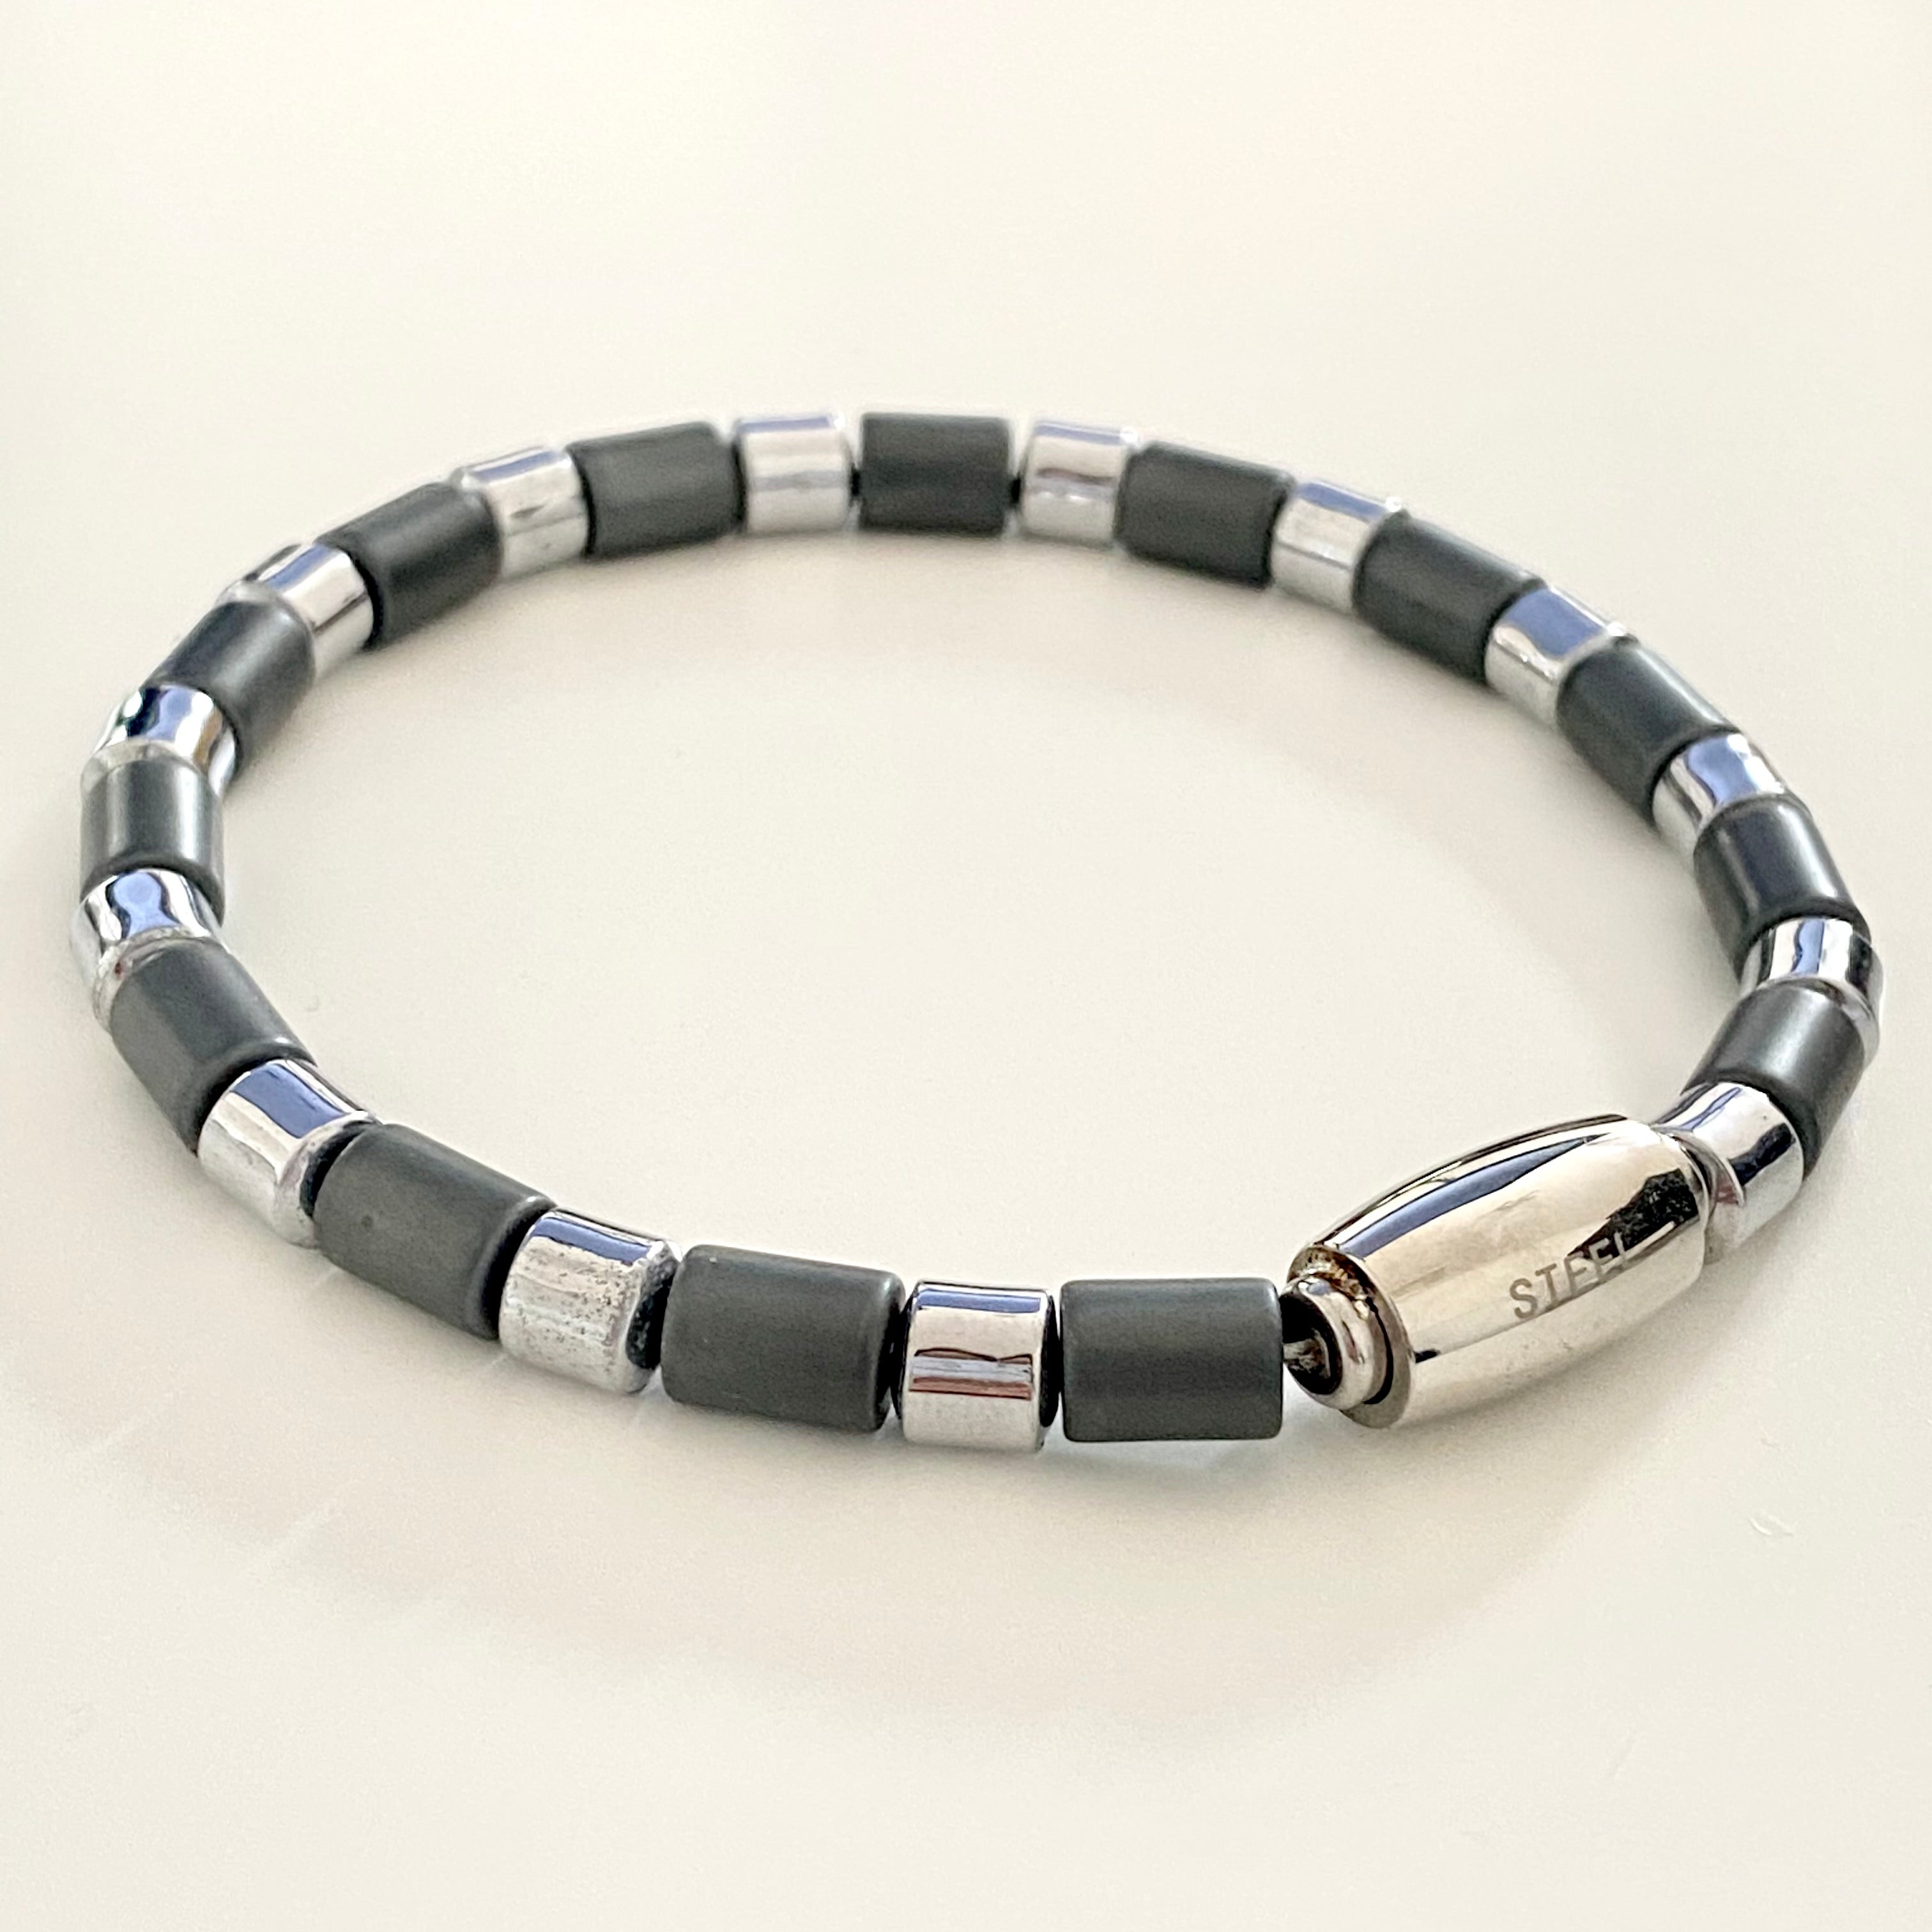 Haematite and Stainless Steel Bead Bracelet with Magnetic Stainless Steel Clasp